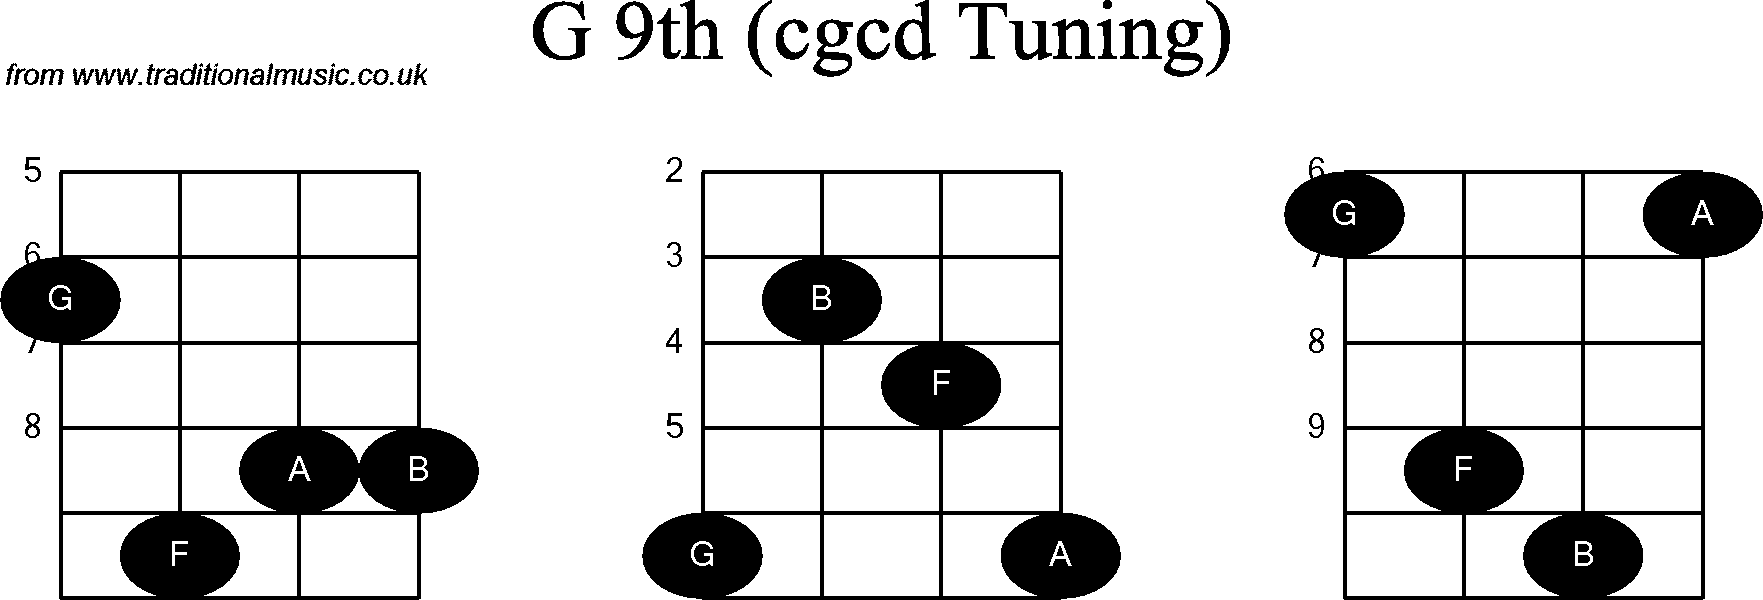 Chord diagrams for Banjo(Double C) G9th